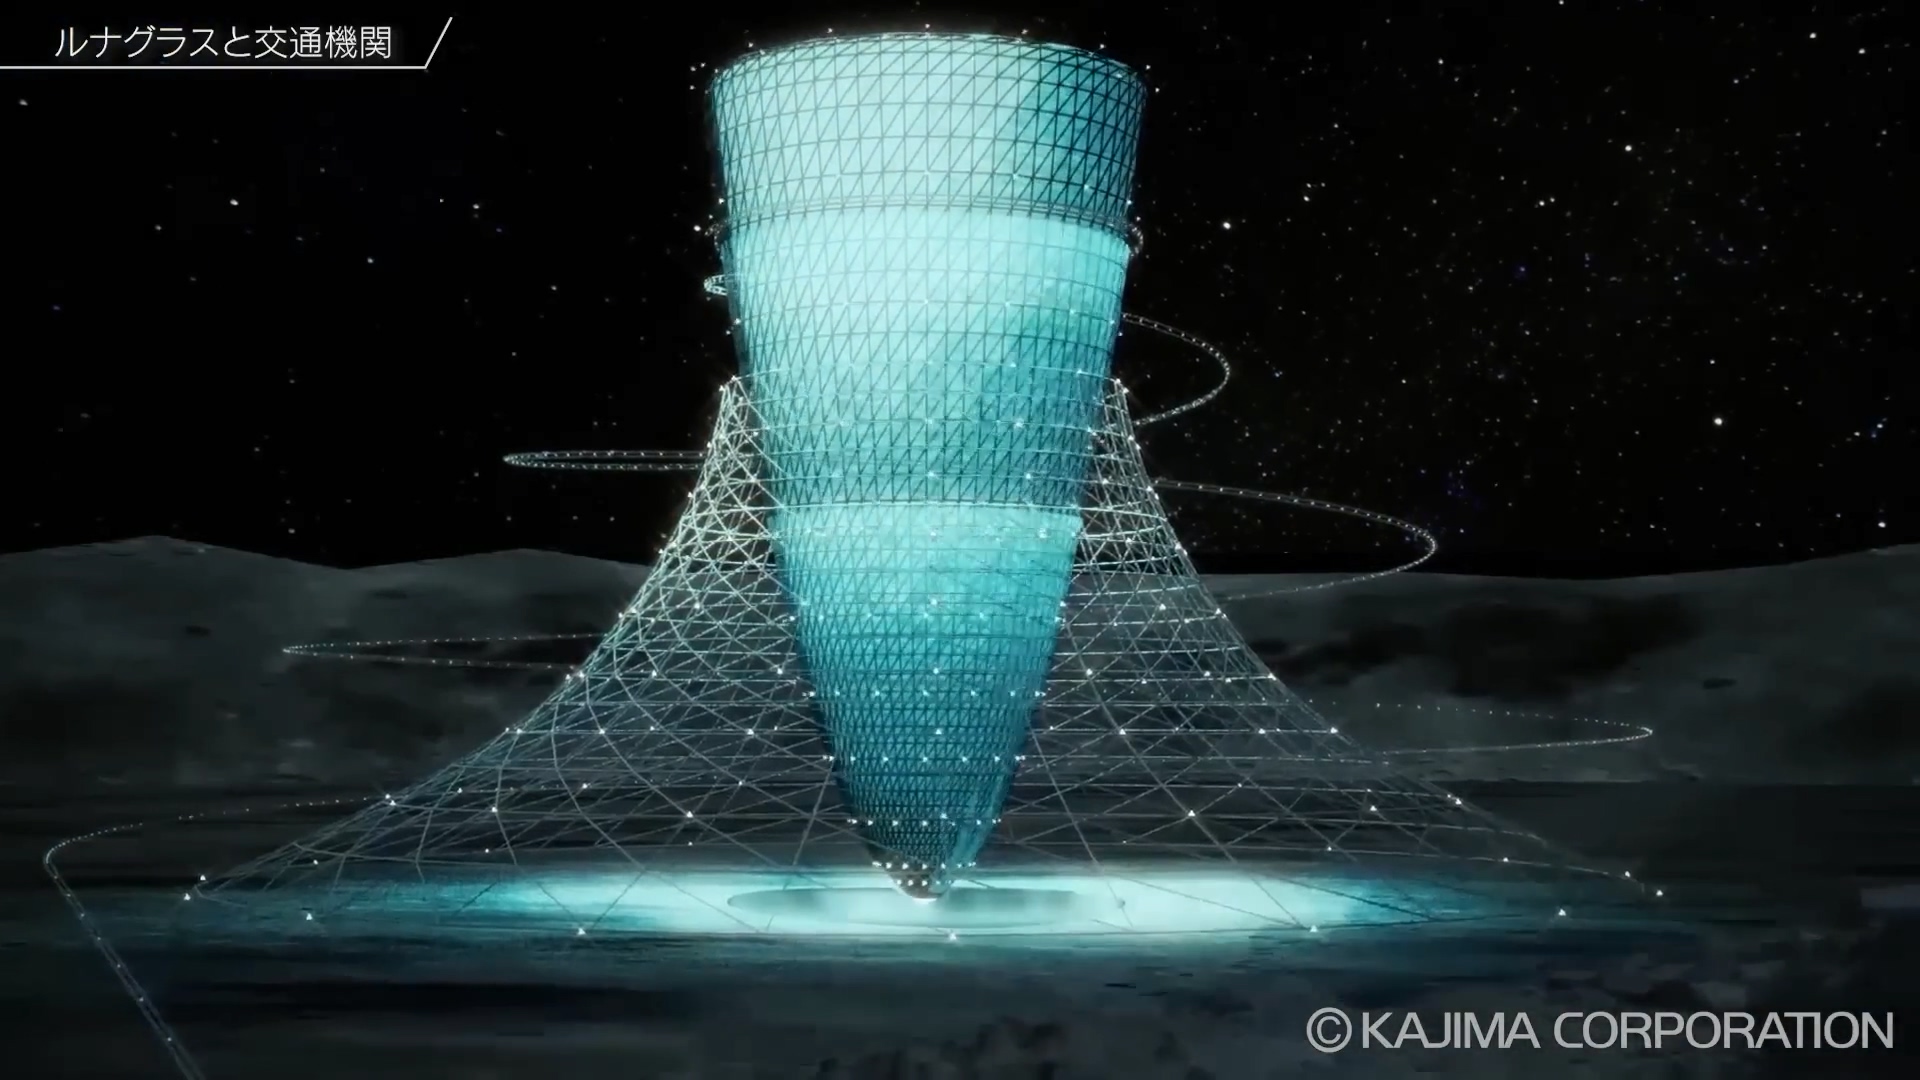 Kyoto University and Kajima Construction Co., Ltd. The Glass. A cylindrical living architecture with artificial gravity set to be constructed in outer space to make living on Mars and the moon possible